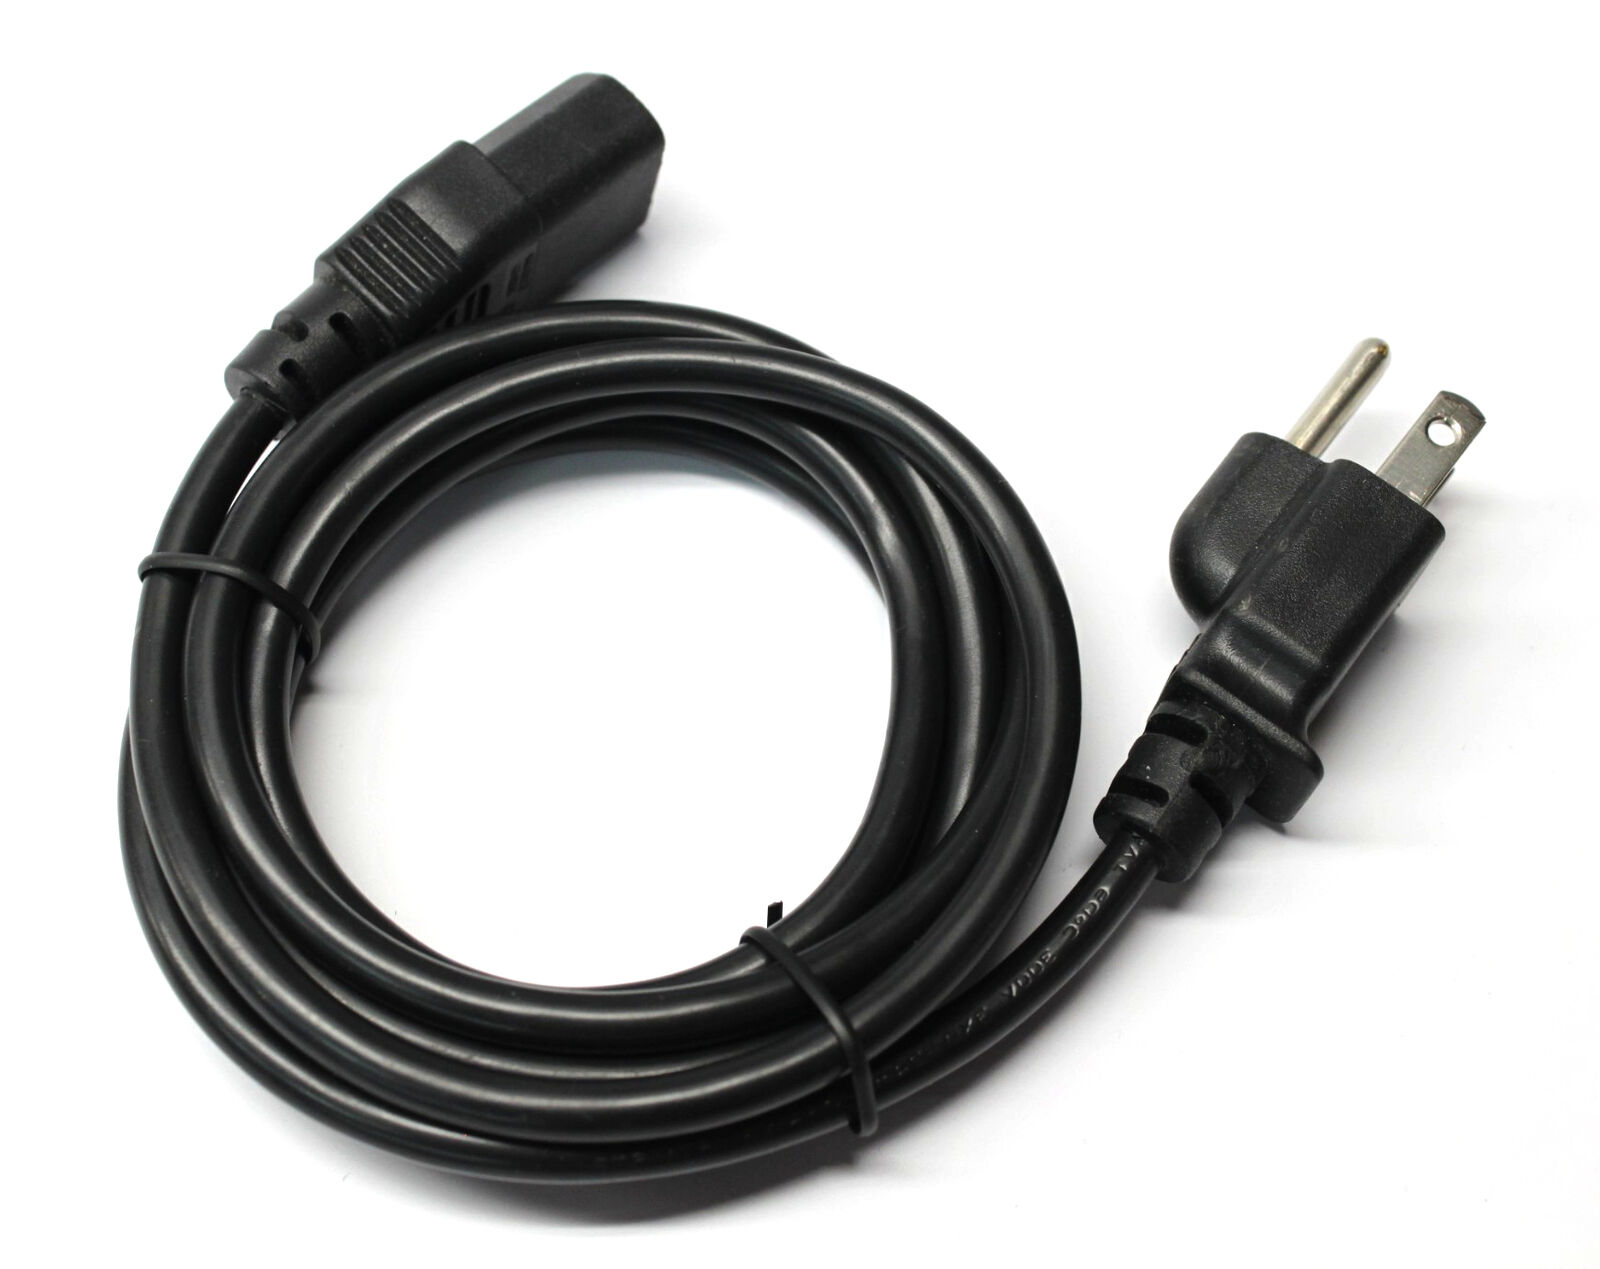 Standard AC Power Supply Cable Cord for Samsung SyncMaster Monitors 943 Series